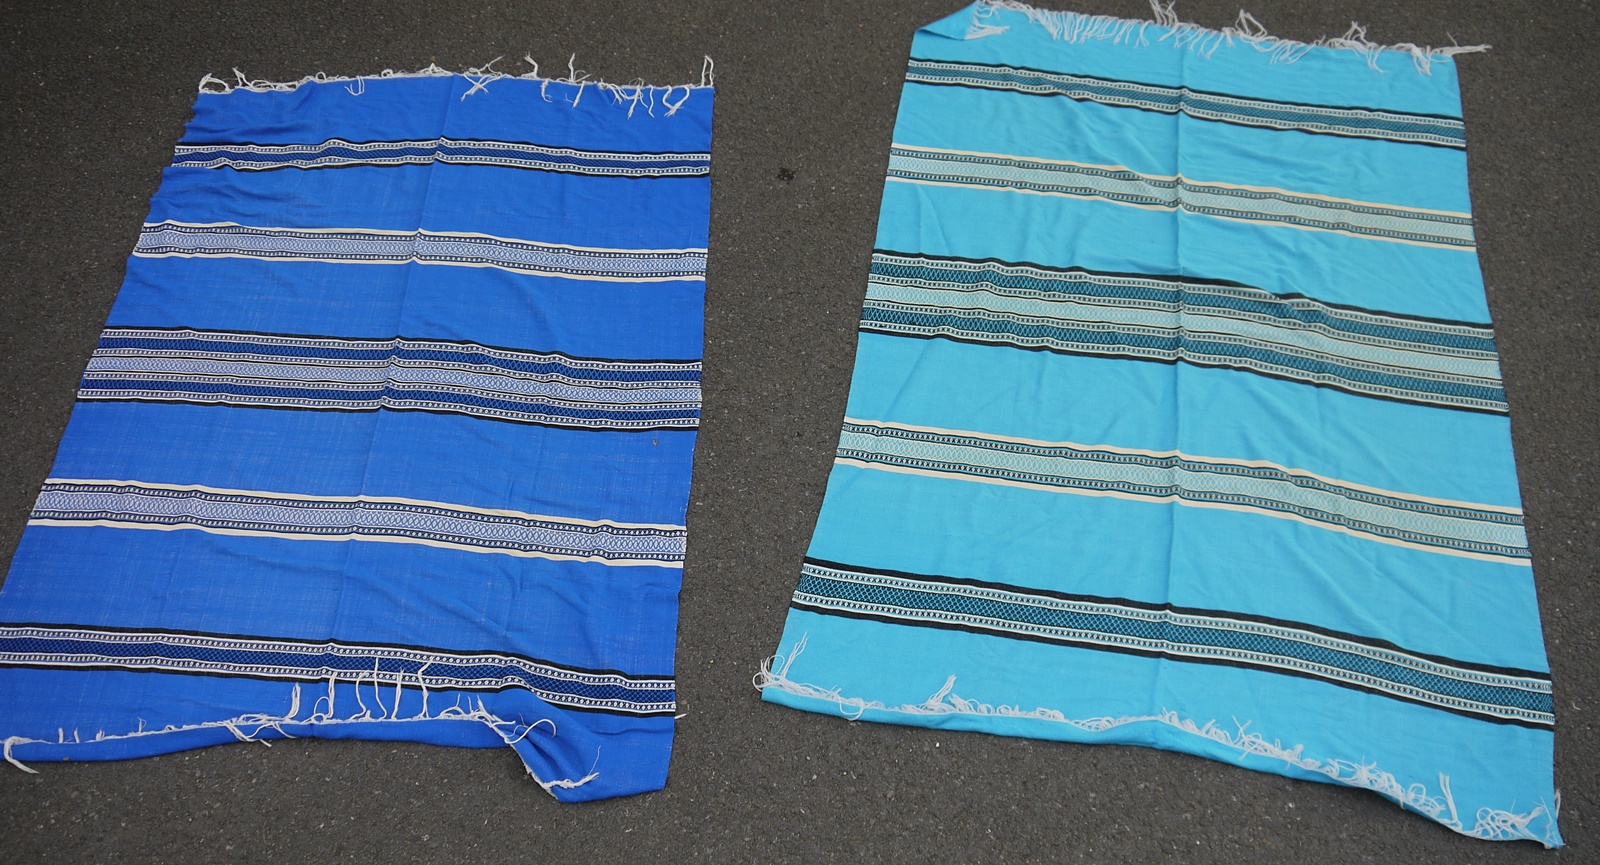 Two similar fringed throws in shades of blue with geometric designs (2)